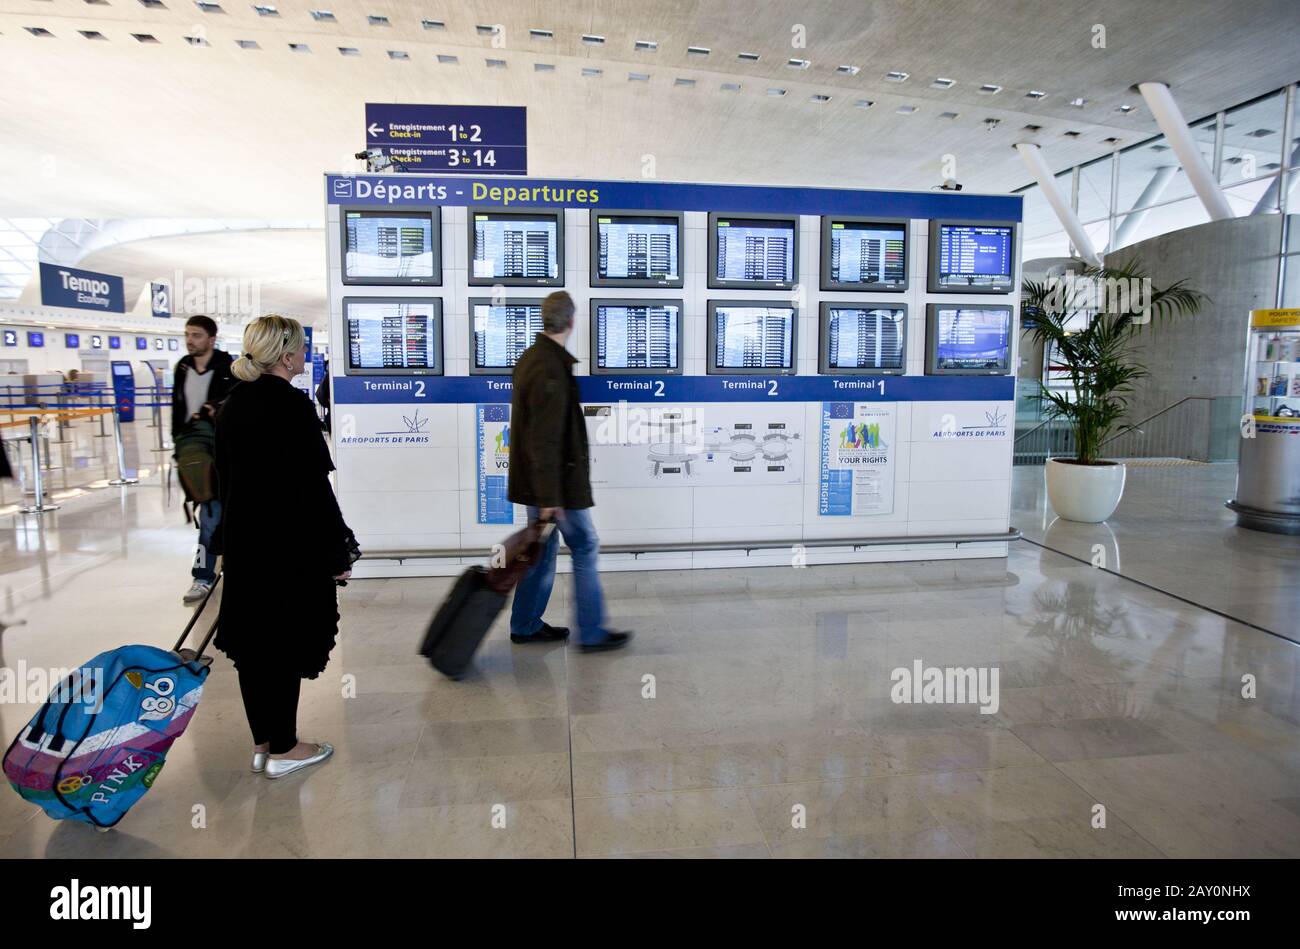 A woman is standing in front of departure information in the departure hall of Terminal 2 Stock Photo